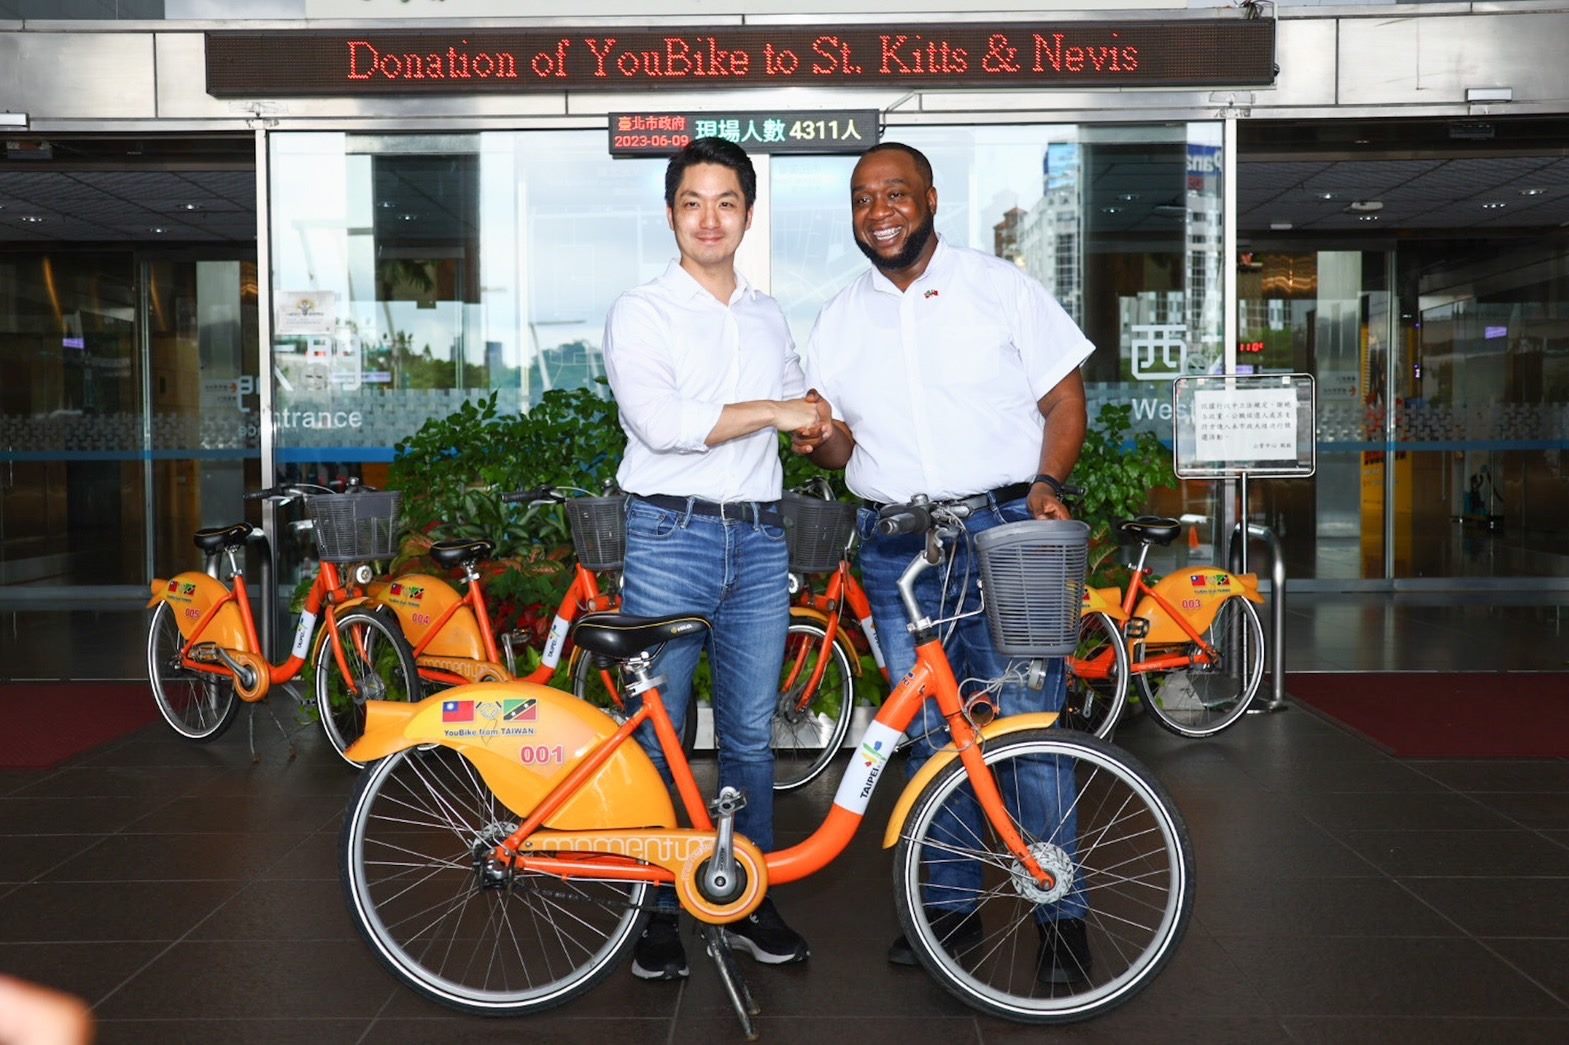  Retired YouBikes 1.0 carrying the youths of Saint Kitts and Nevis forward